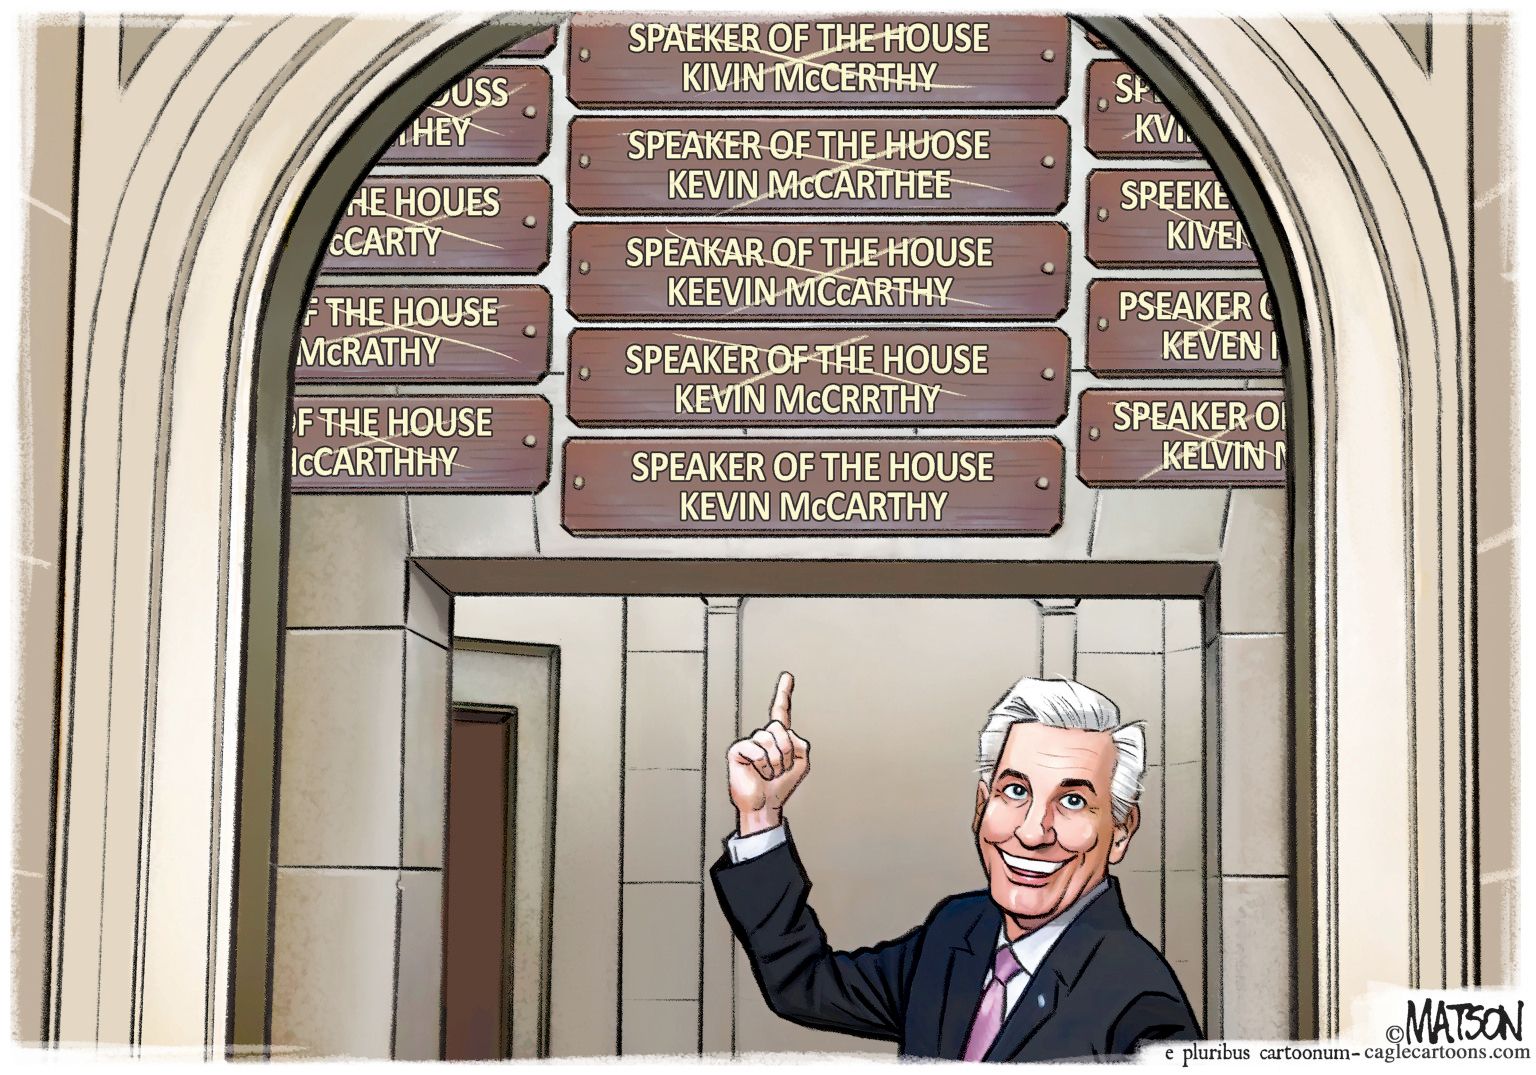 15th Time is the Charm for Speaker McCarthy - newsjustin.press editorial political cartoon